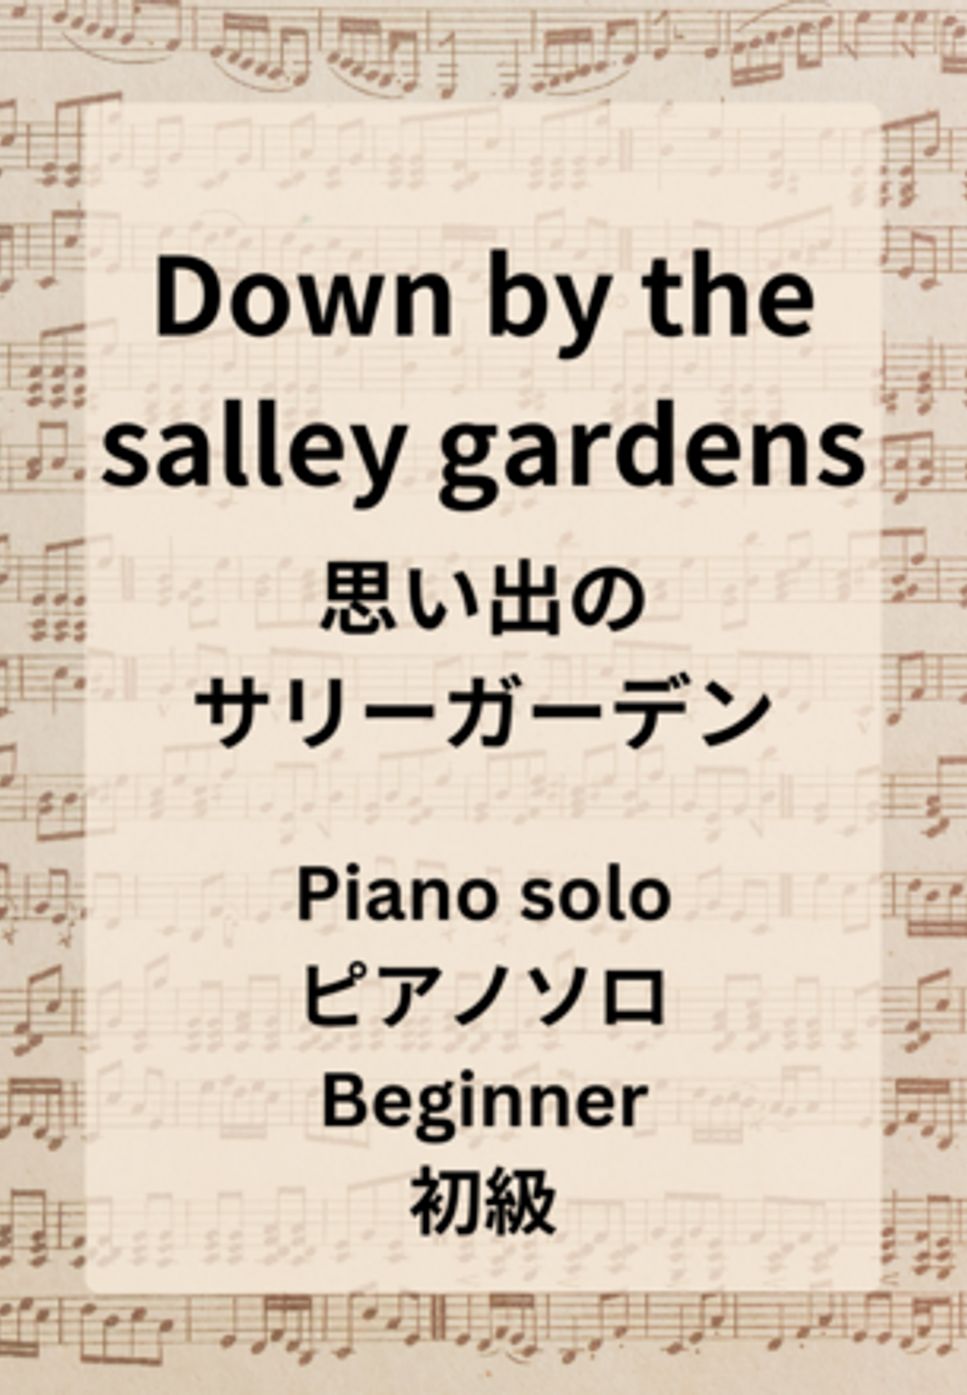 Down by the salley gardens（思い出のサリーガーデン） by Hiromiki Ono